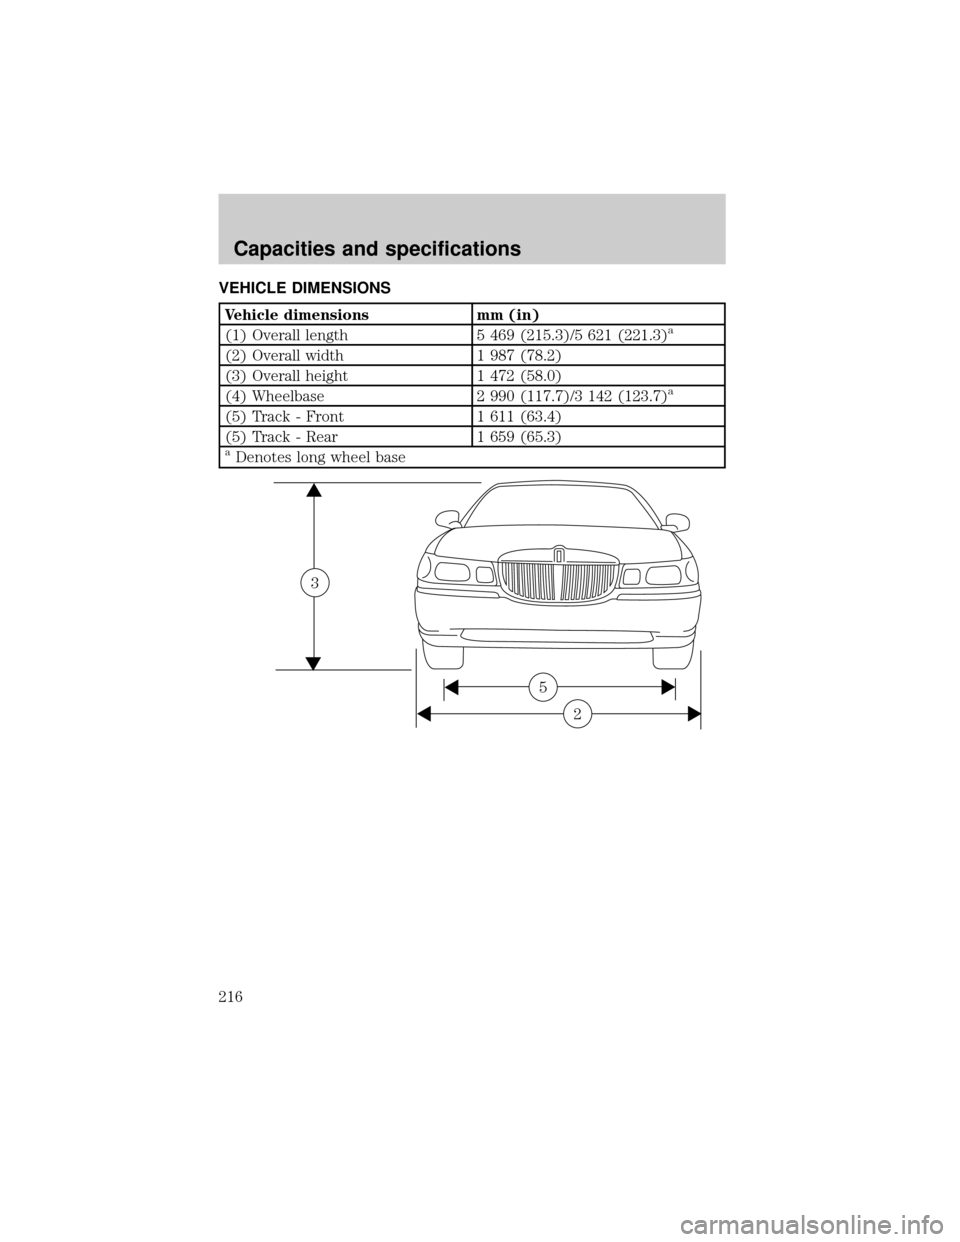 LINCOLN TOWN CAR 2001  Owners Manual VEHICLE DIMENSIONS
Vehicle dimensions mm (in)
(1) Overall length 5 469 (215.3)/5 621 (221.3)a
(2) Overall width 1 987 (78.2)
(3) Overall height 1 472 (58.0)
(4) Wheelbase 2 990 (117.7)/3 142 (123.7)
a